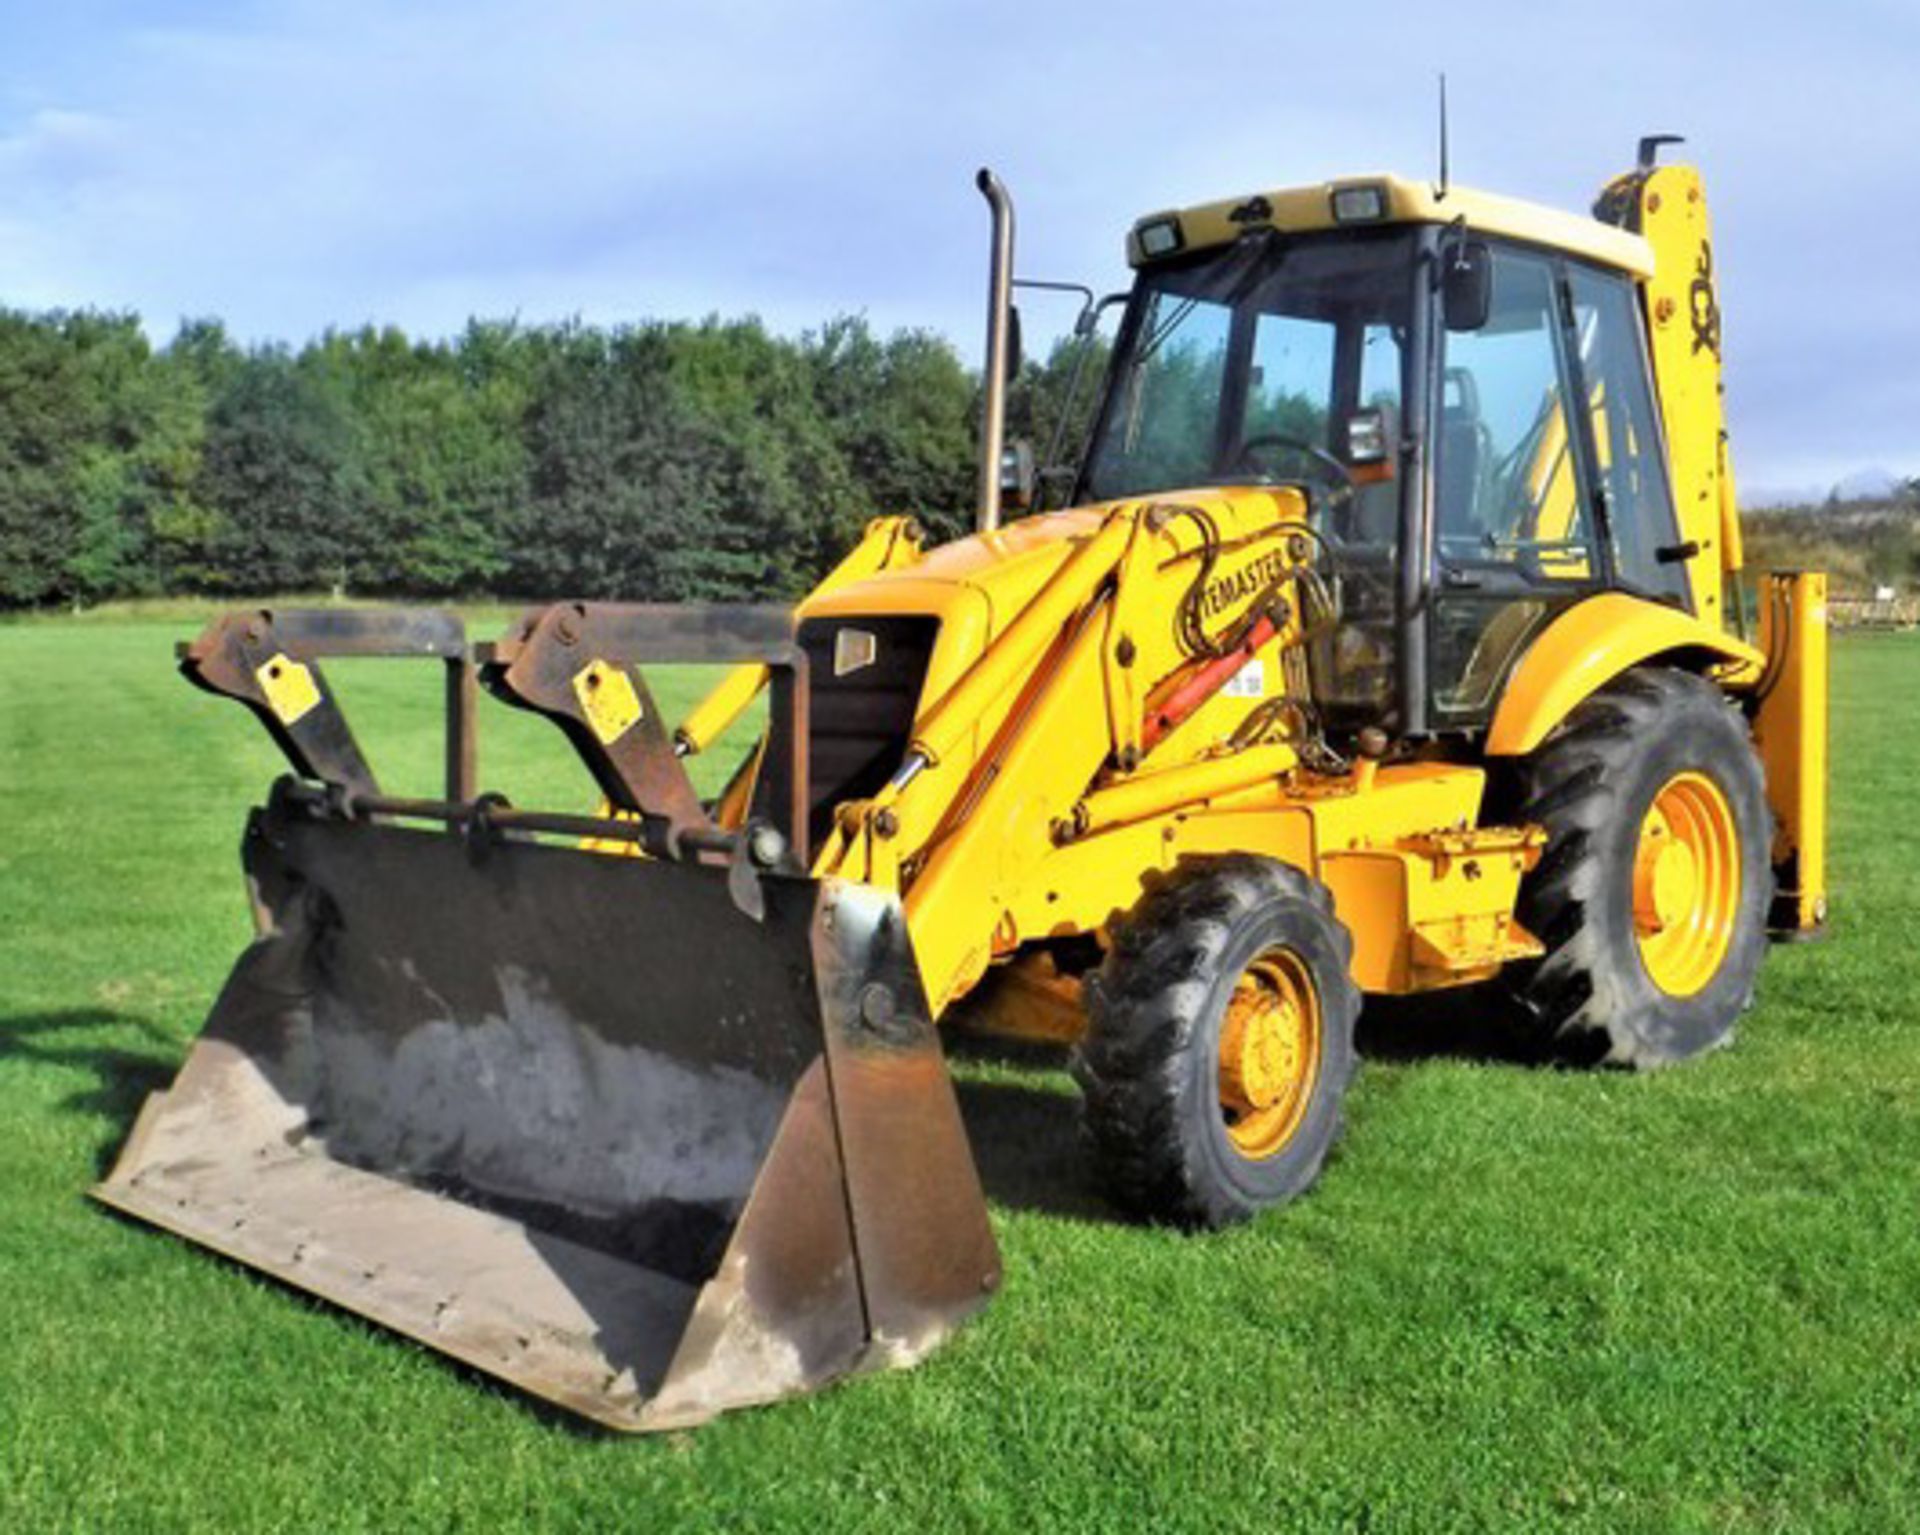 1999 JCB 3CX Sitemaster. S/N SLP3CXTSXE0479559. 786hrs (not verified). 1 bucket. JCB maintained from